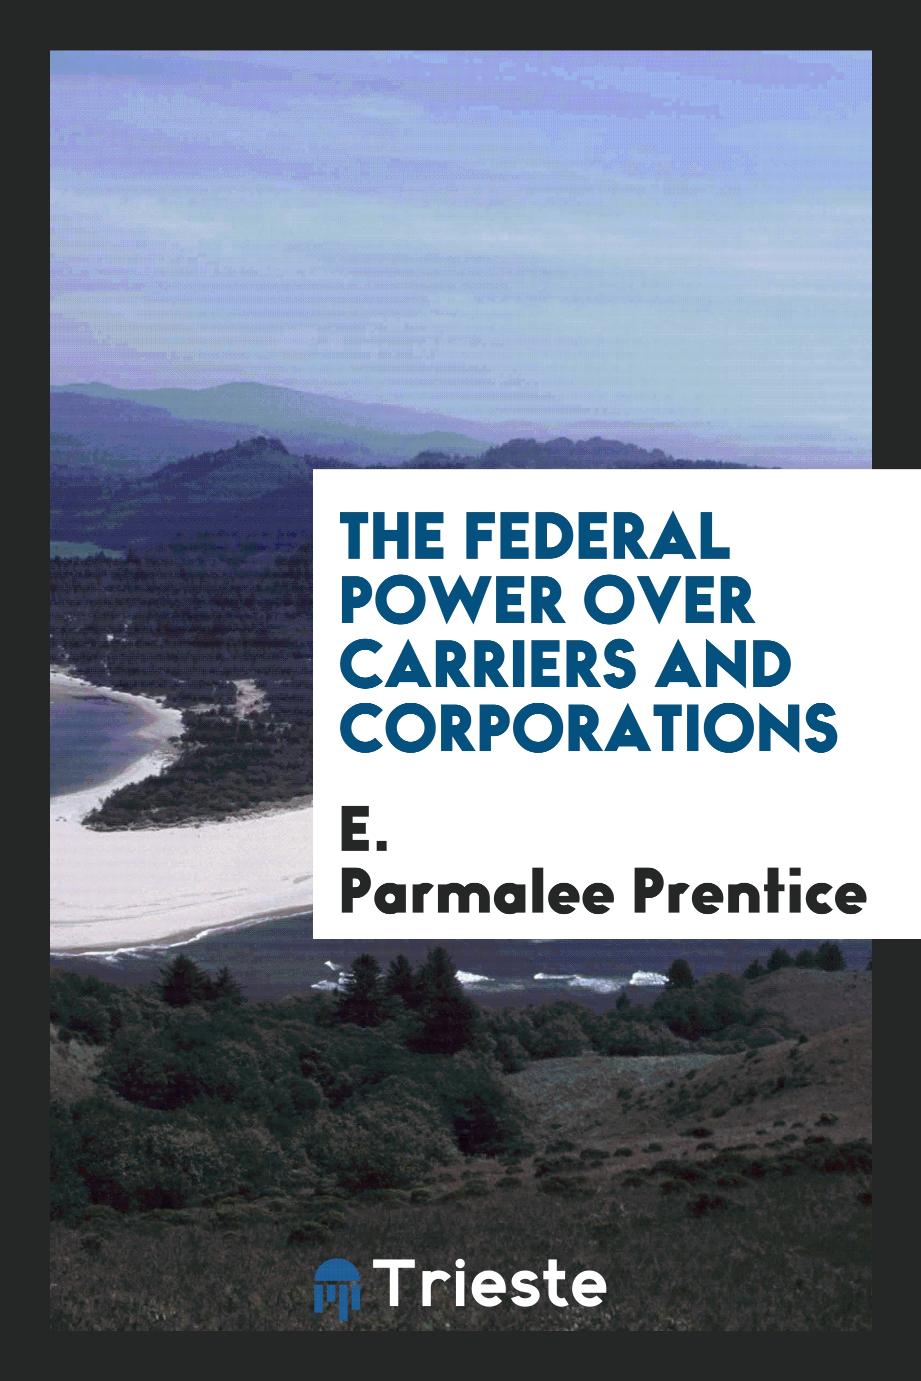 The federal power over carriers and corporations